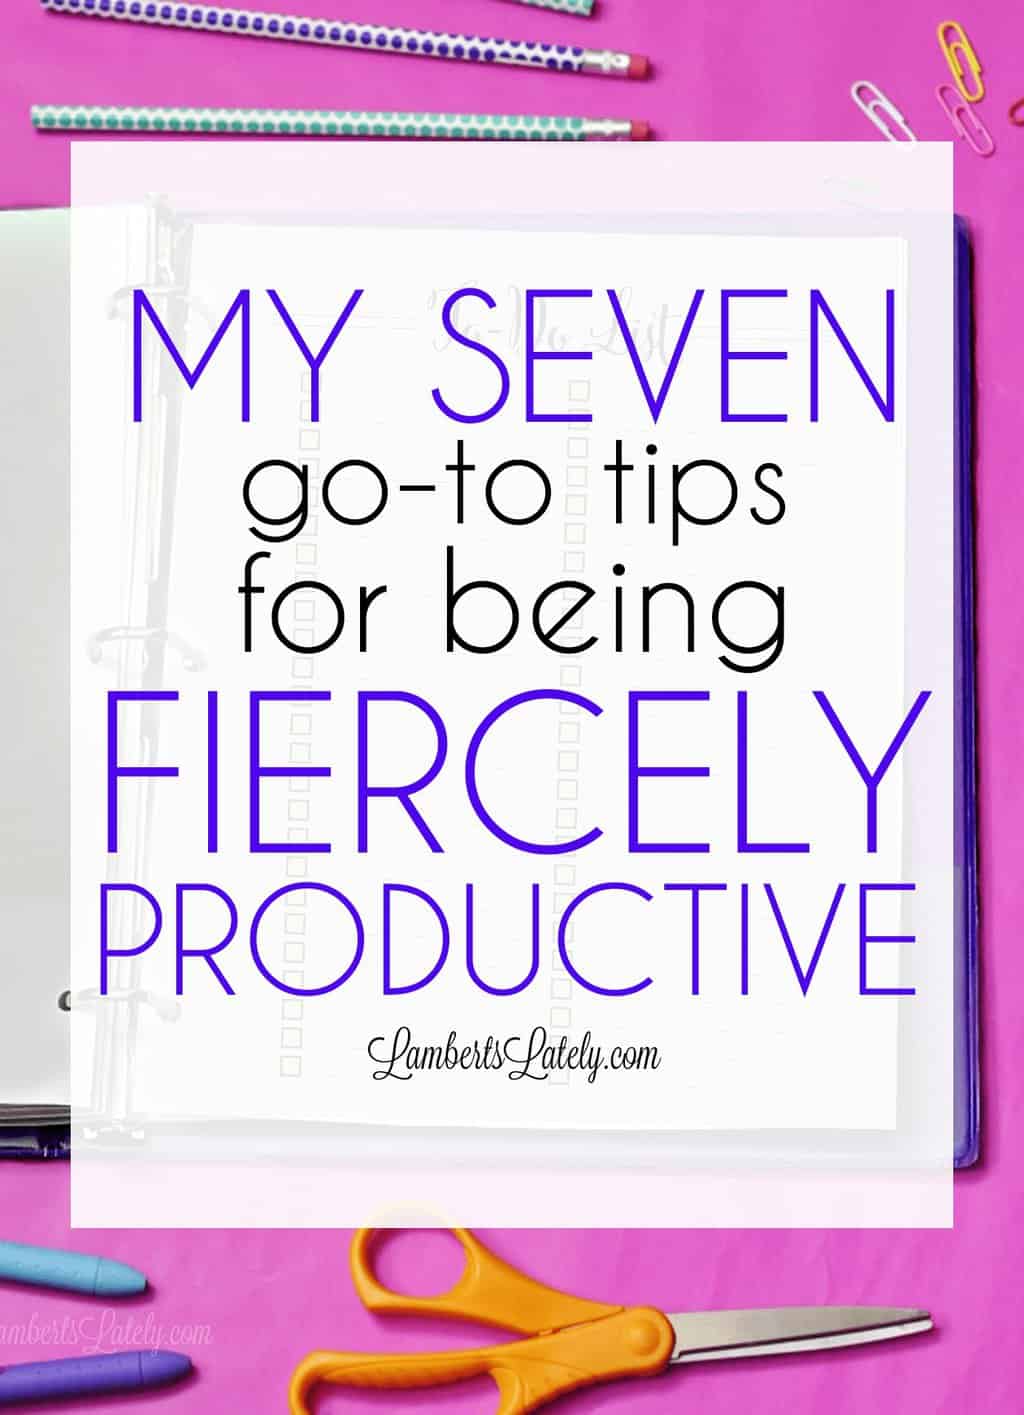 Want to know the things to do to make your day as productive as possible?  Check out this list of 7 tips that will increase your productivity through goal setting, time blocking, and use of motivational tools!